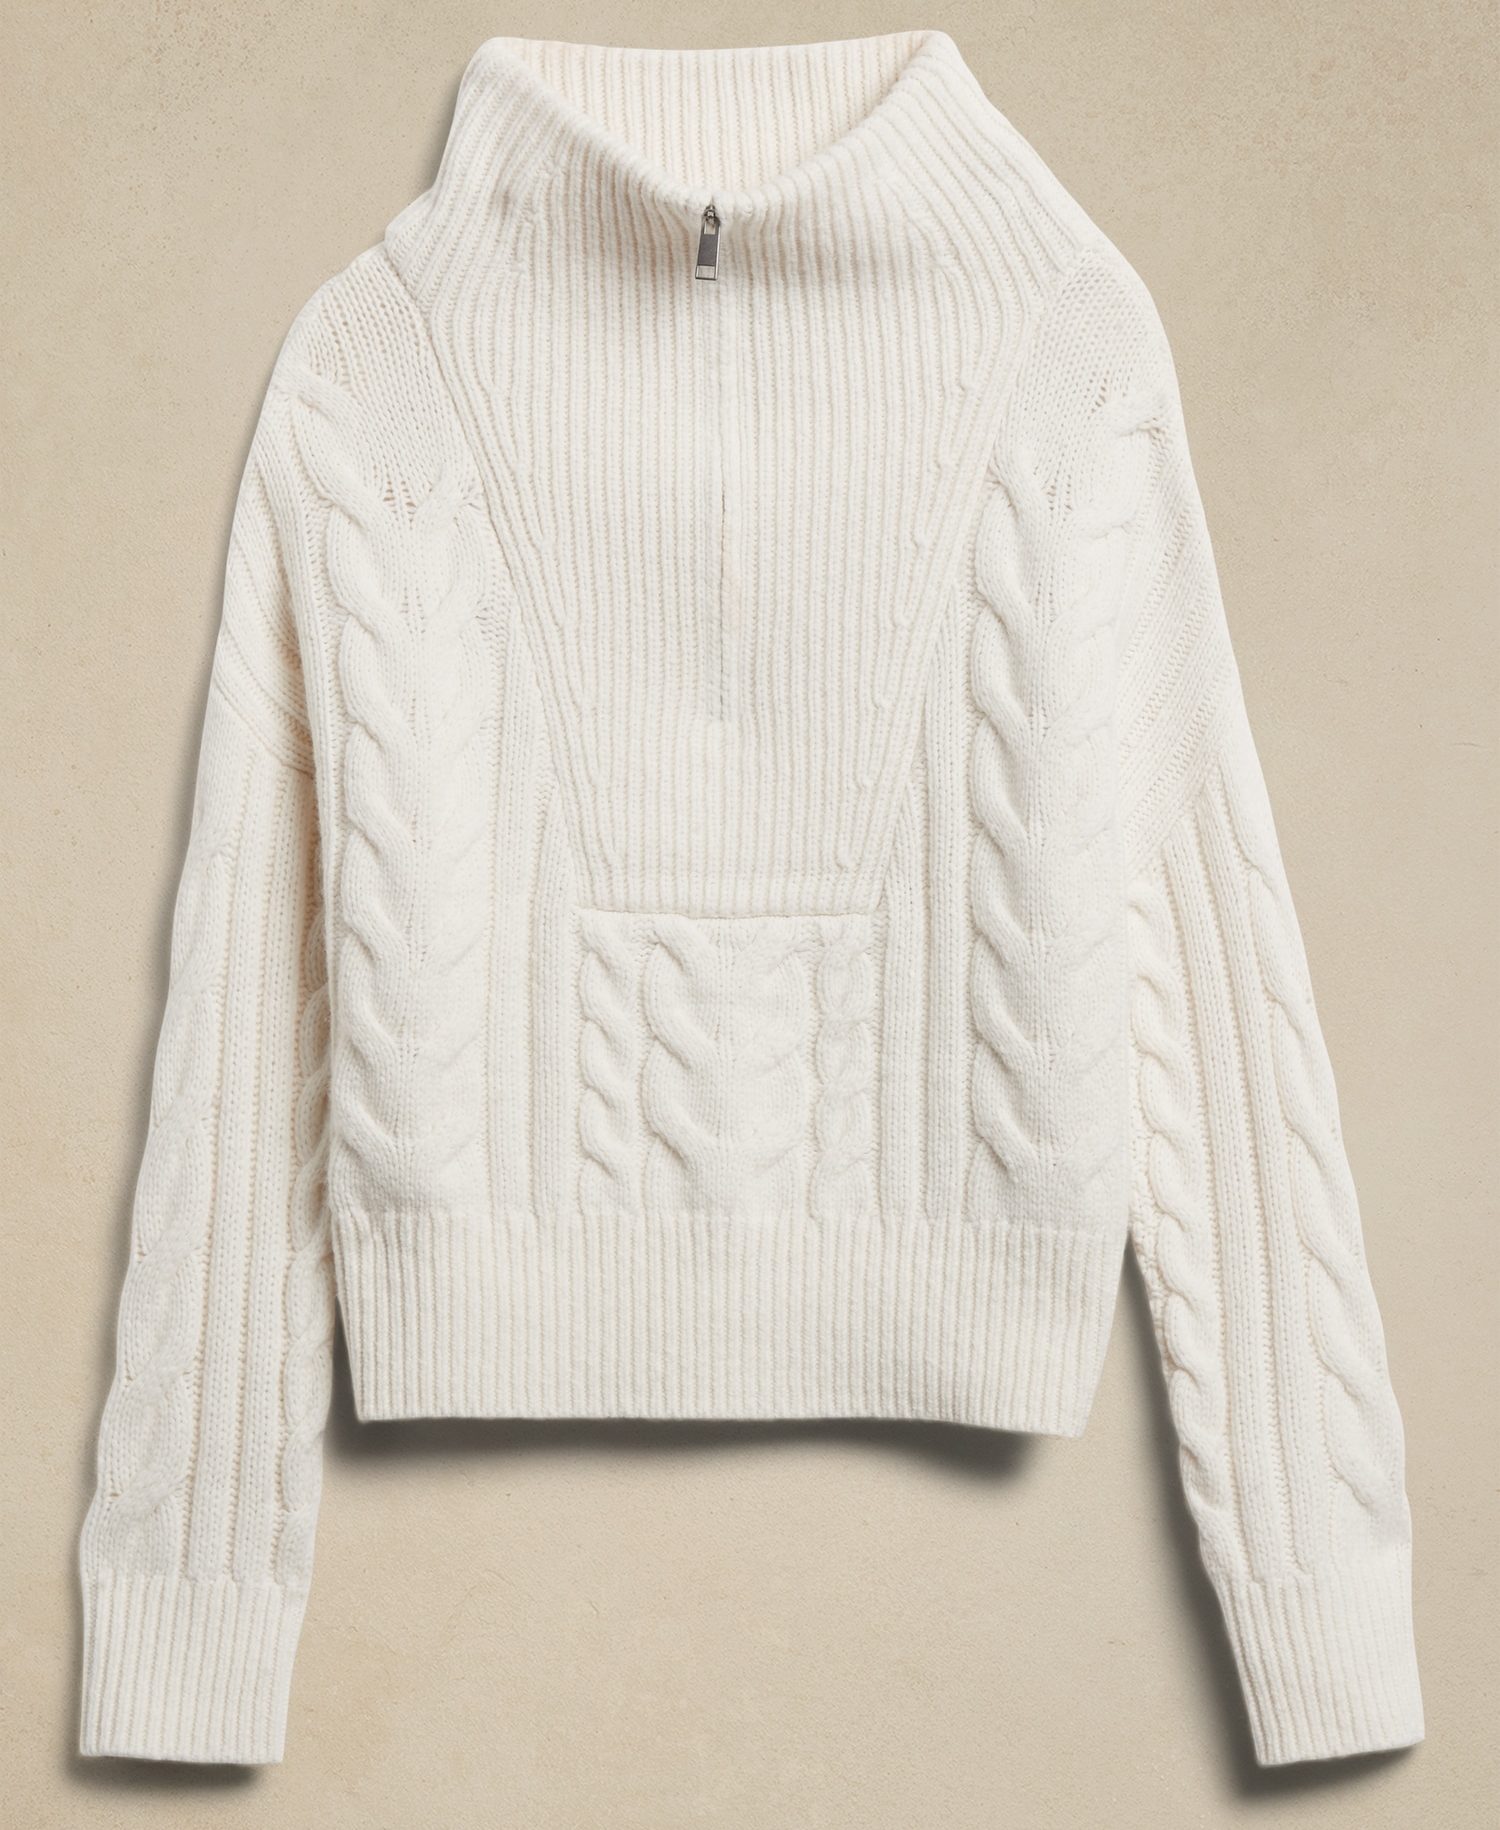 Stylist Pick Of The Week Round Up neutral half zip sweater quality sweater for winter Nashville stylists share favorite winter sweater personal stylists share favorite neutral sweater for winter personal stylists share favorite items for winter